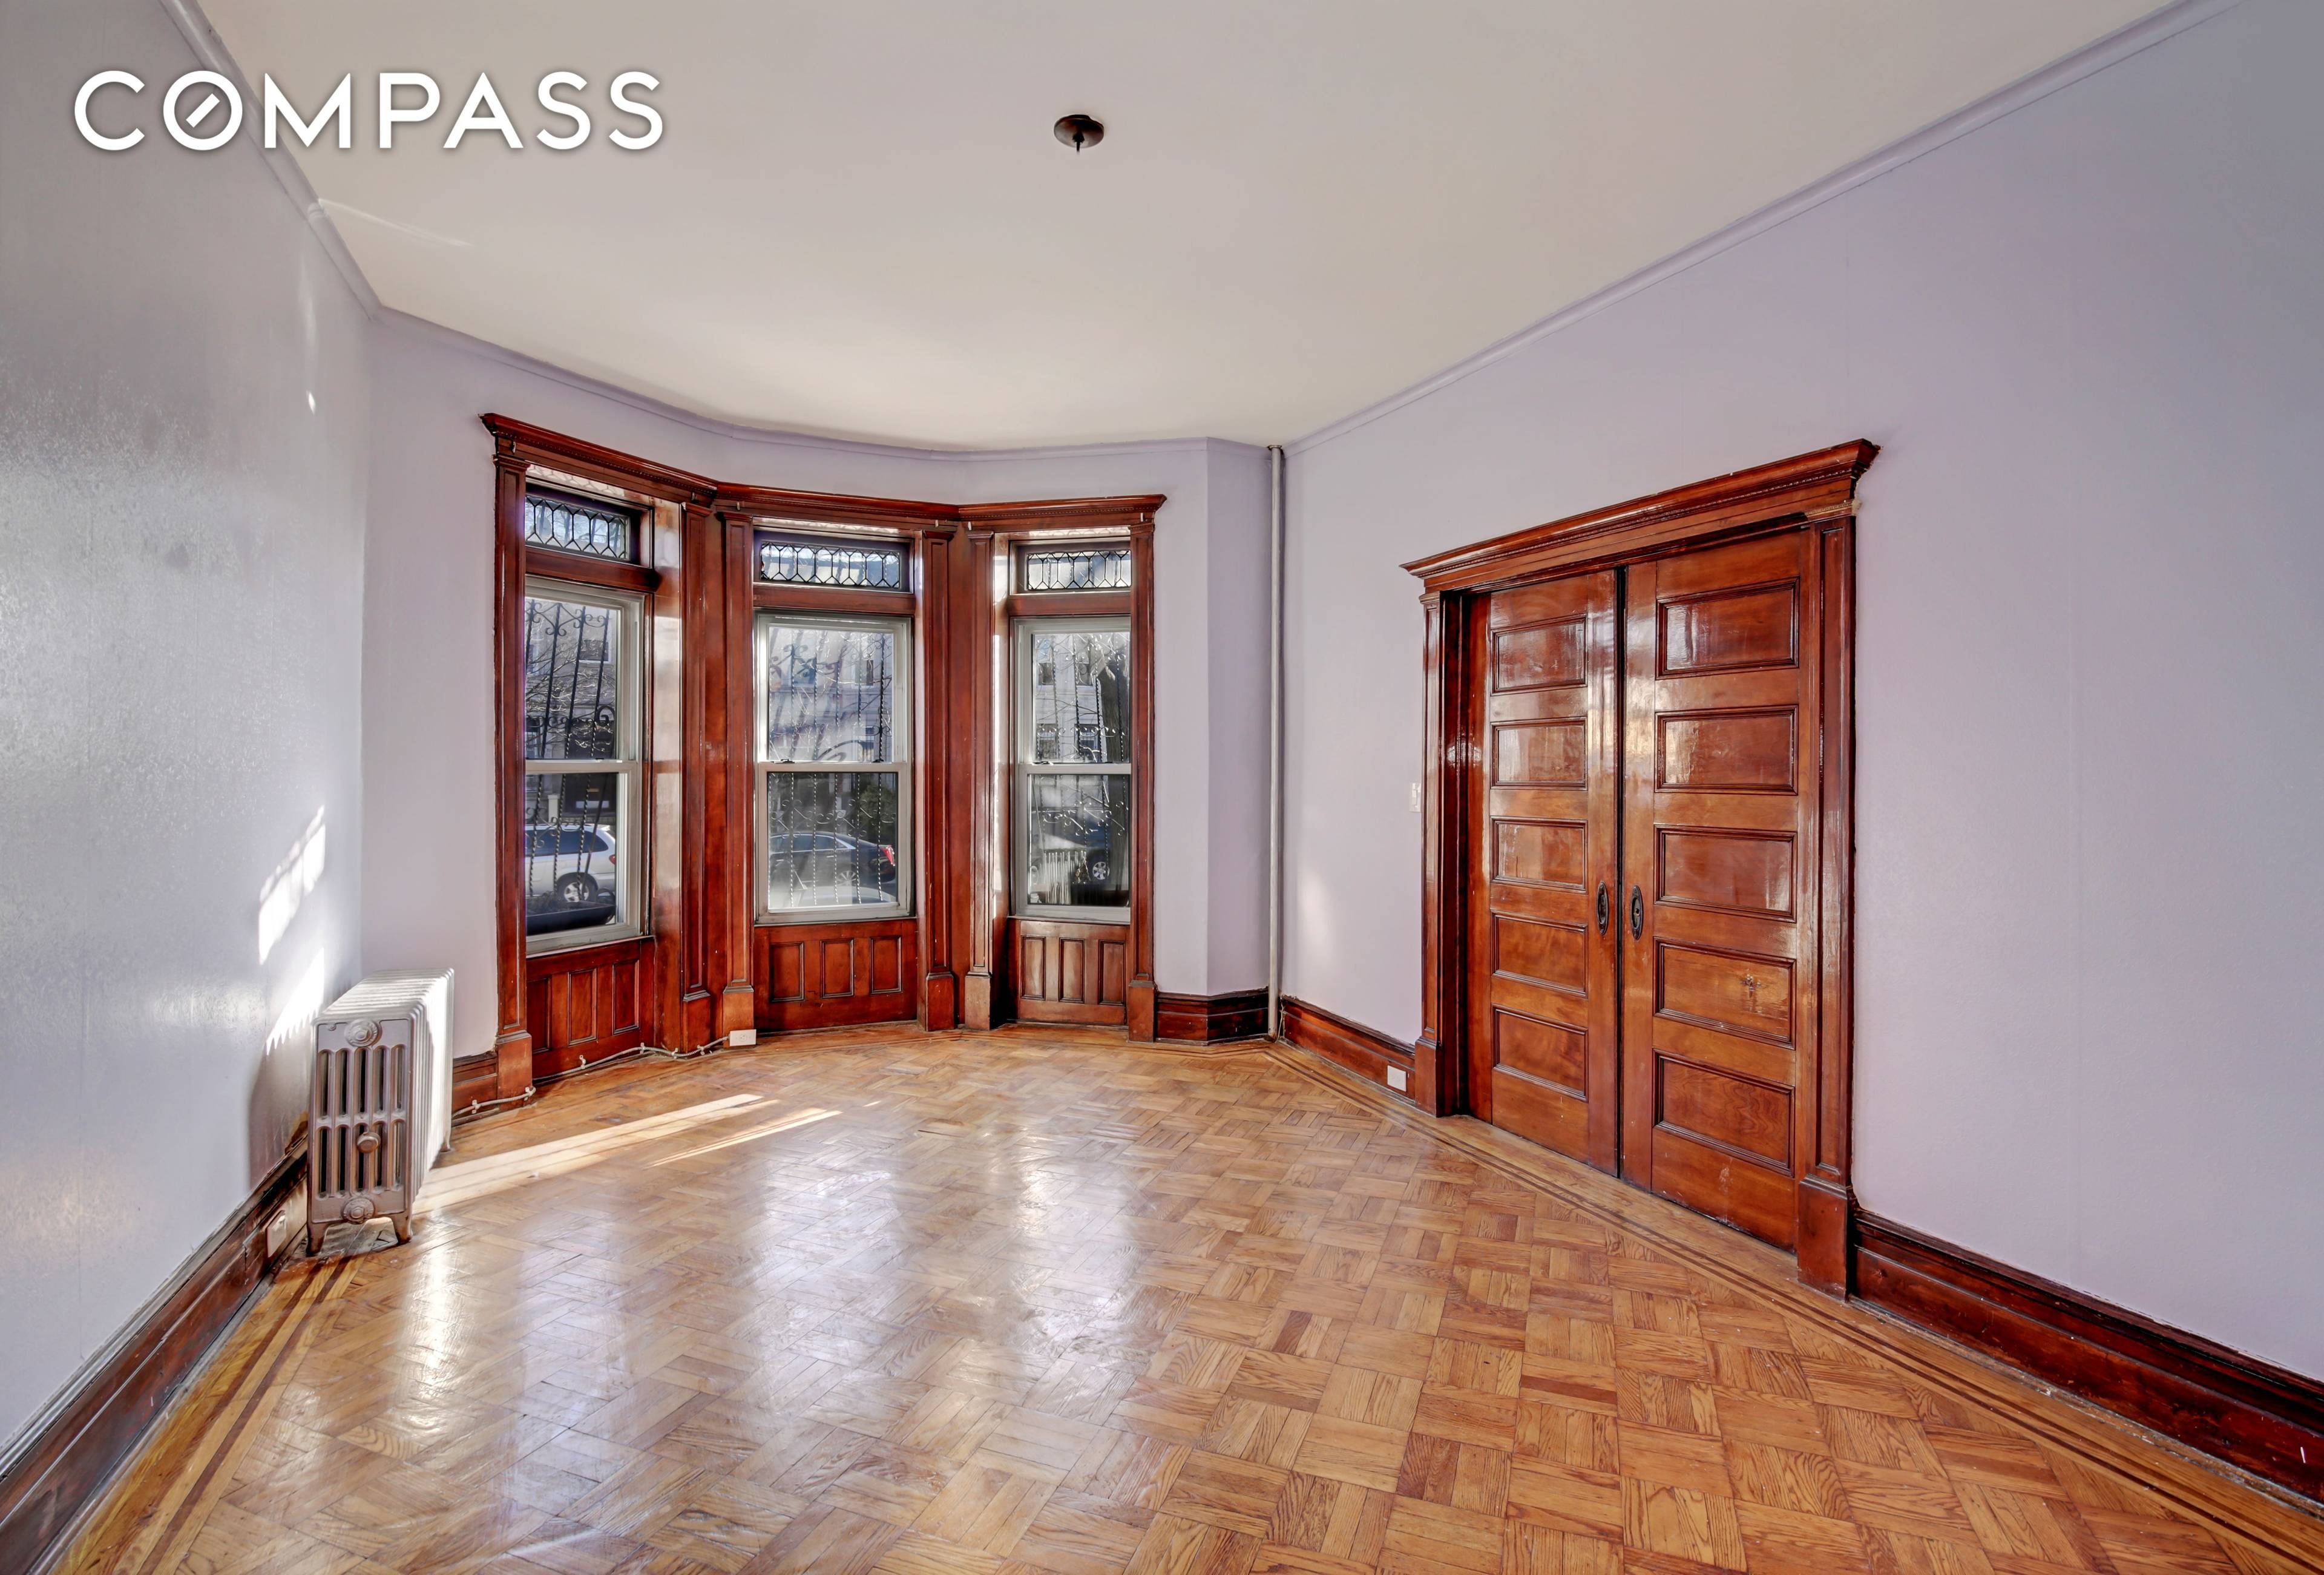 Welcome to 291 Lefferts Avenue 1 The apartment features one large bedroom, a formal dining room, a dressing room, and a shared backyard.